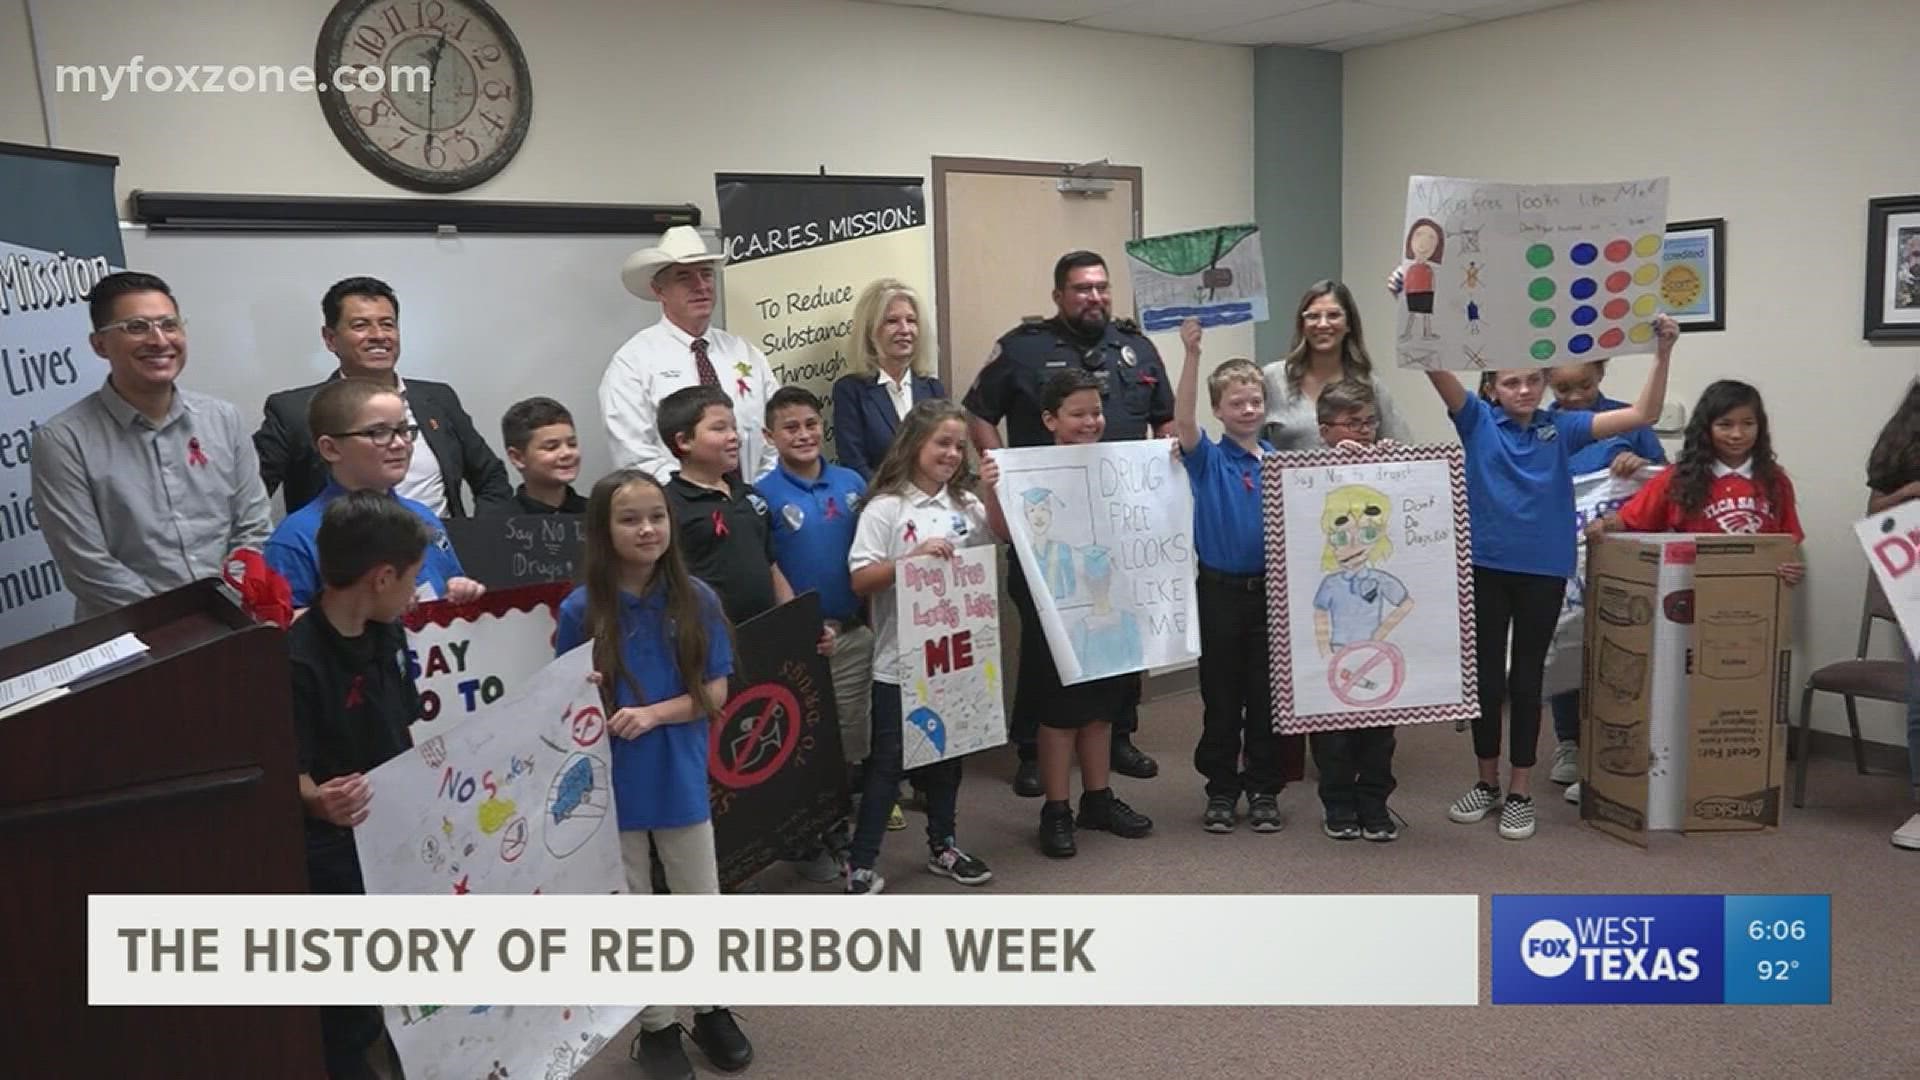 Red Ribbon Week is an alcohol, tobacco and other drug and violence prevention awareness campaign observed annually in October in the United States.